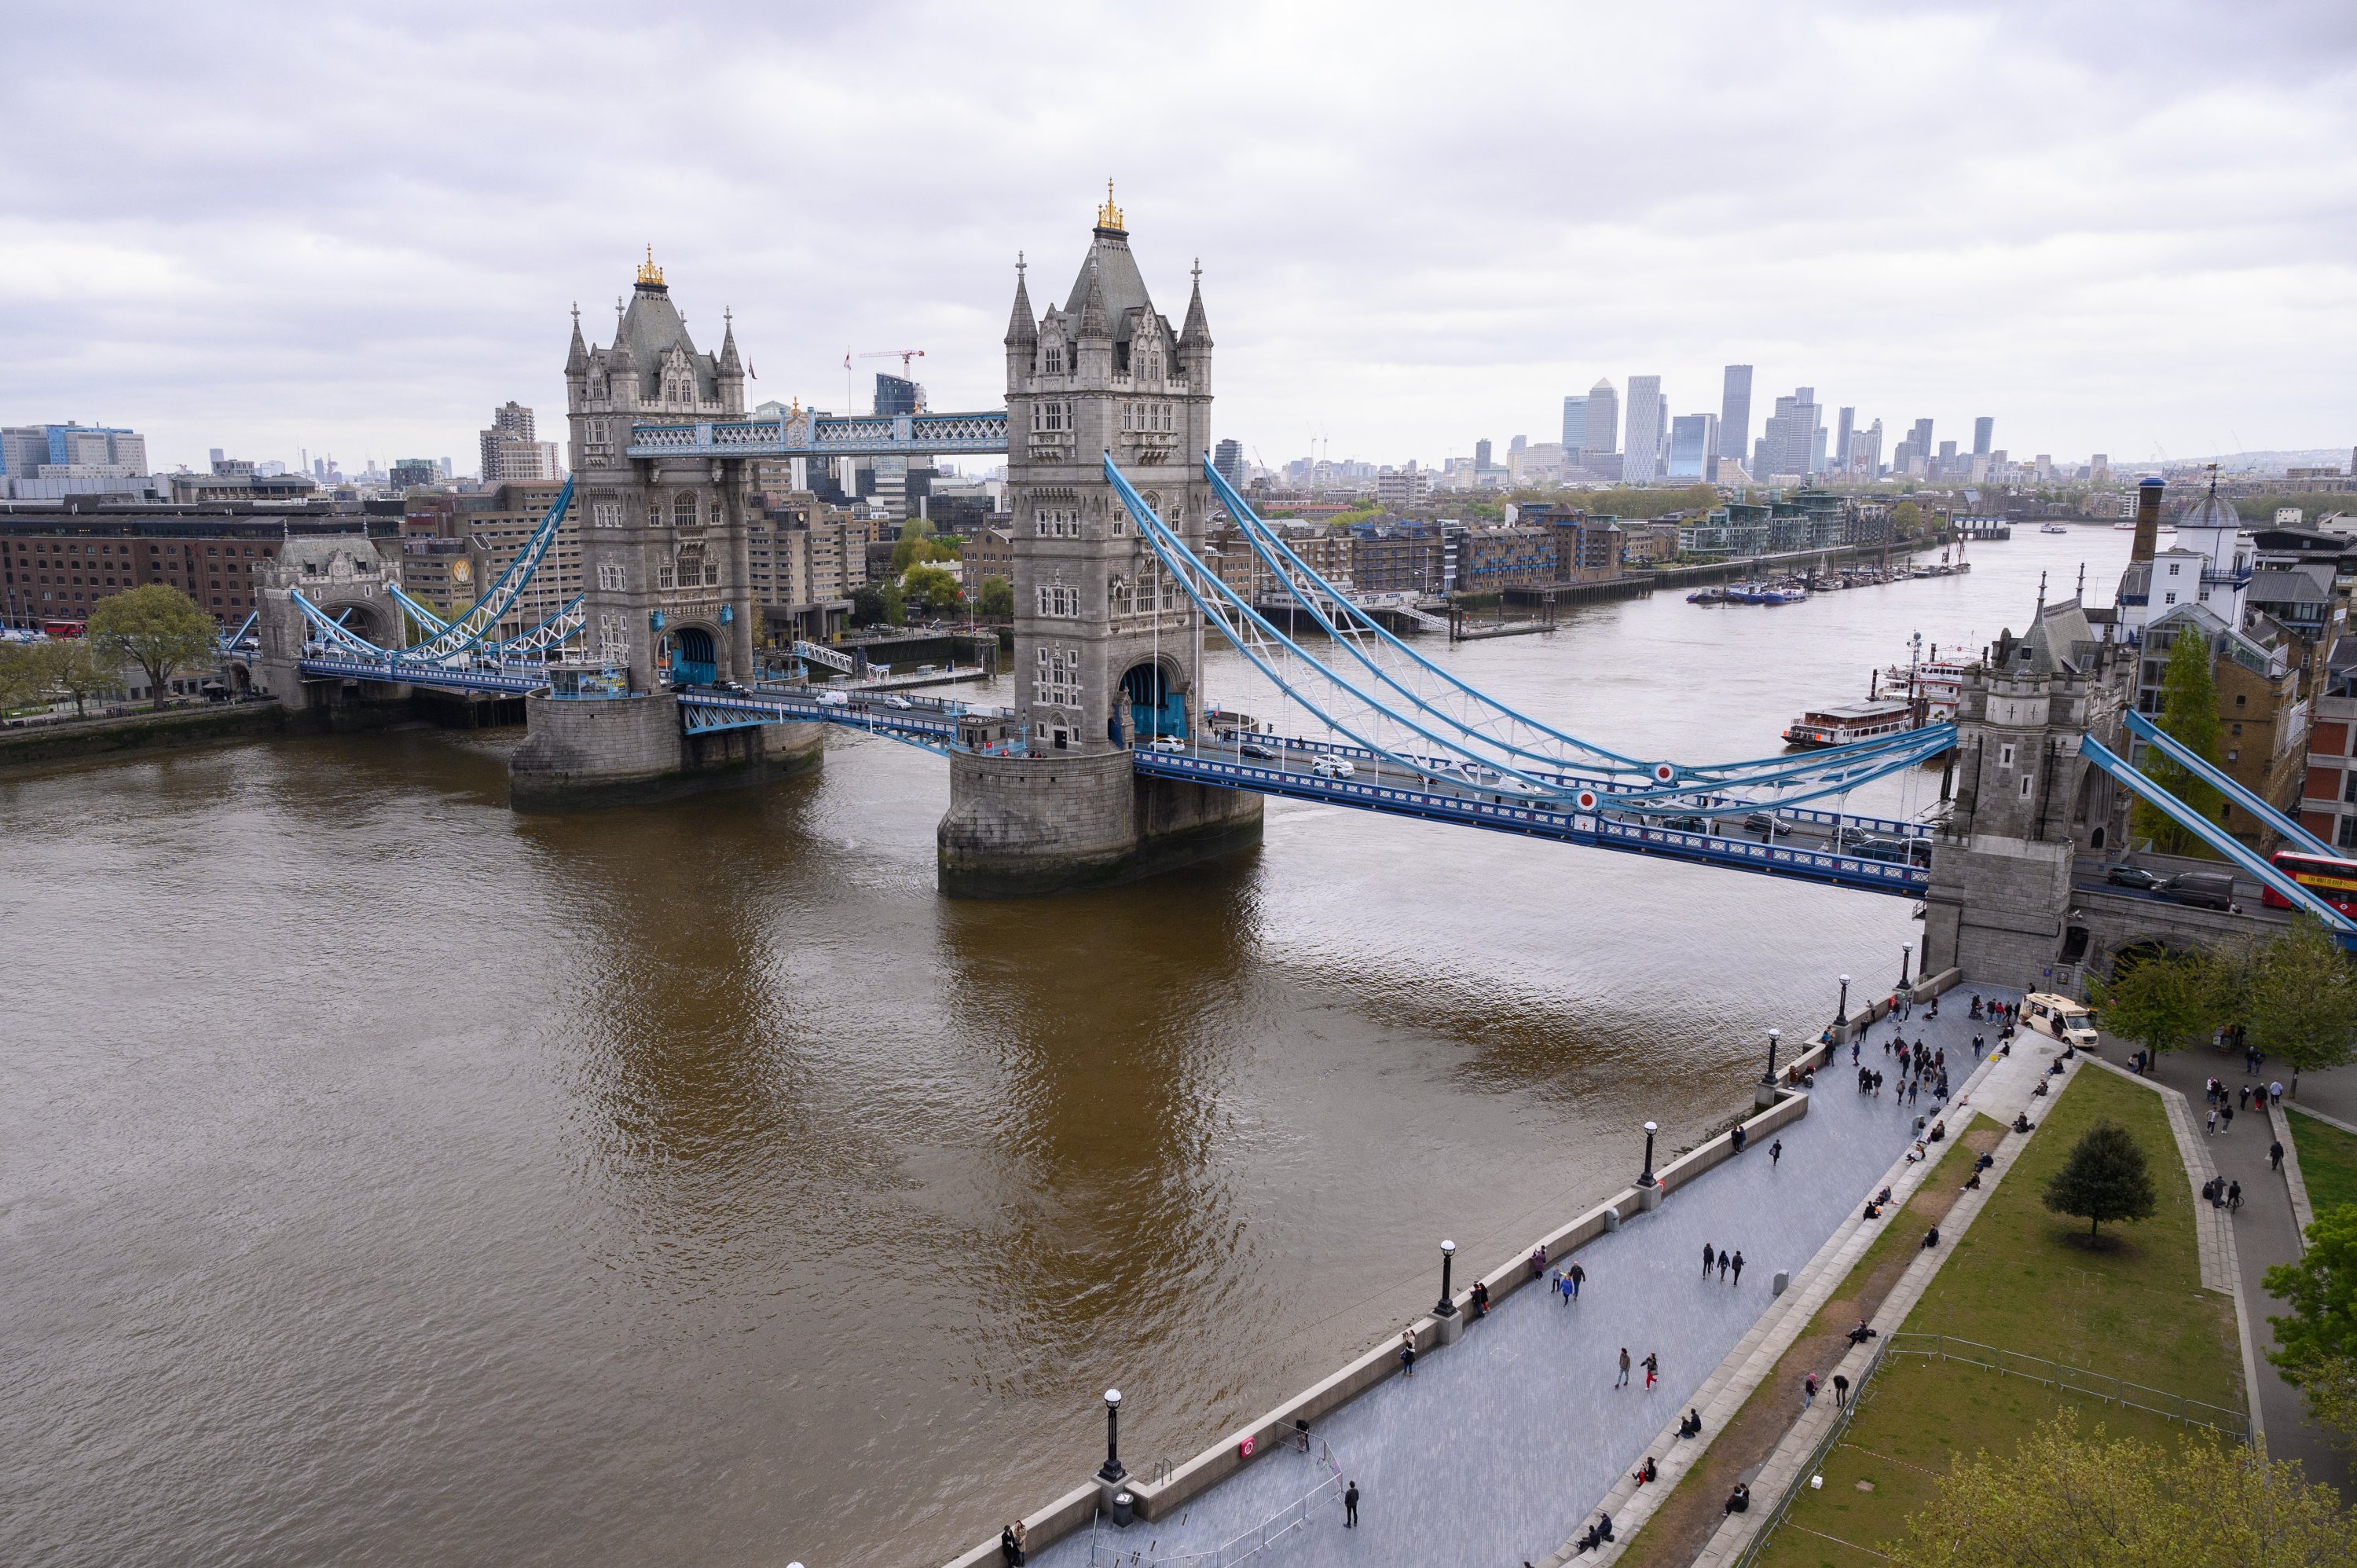 A general view of Tower Bridge spanning the River Thames, with the Canary Wharf financial district visible in the distance is seen, London, U.K., May 8, 2021. (Photo by Getty Images)